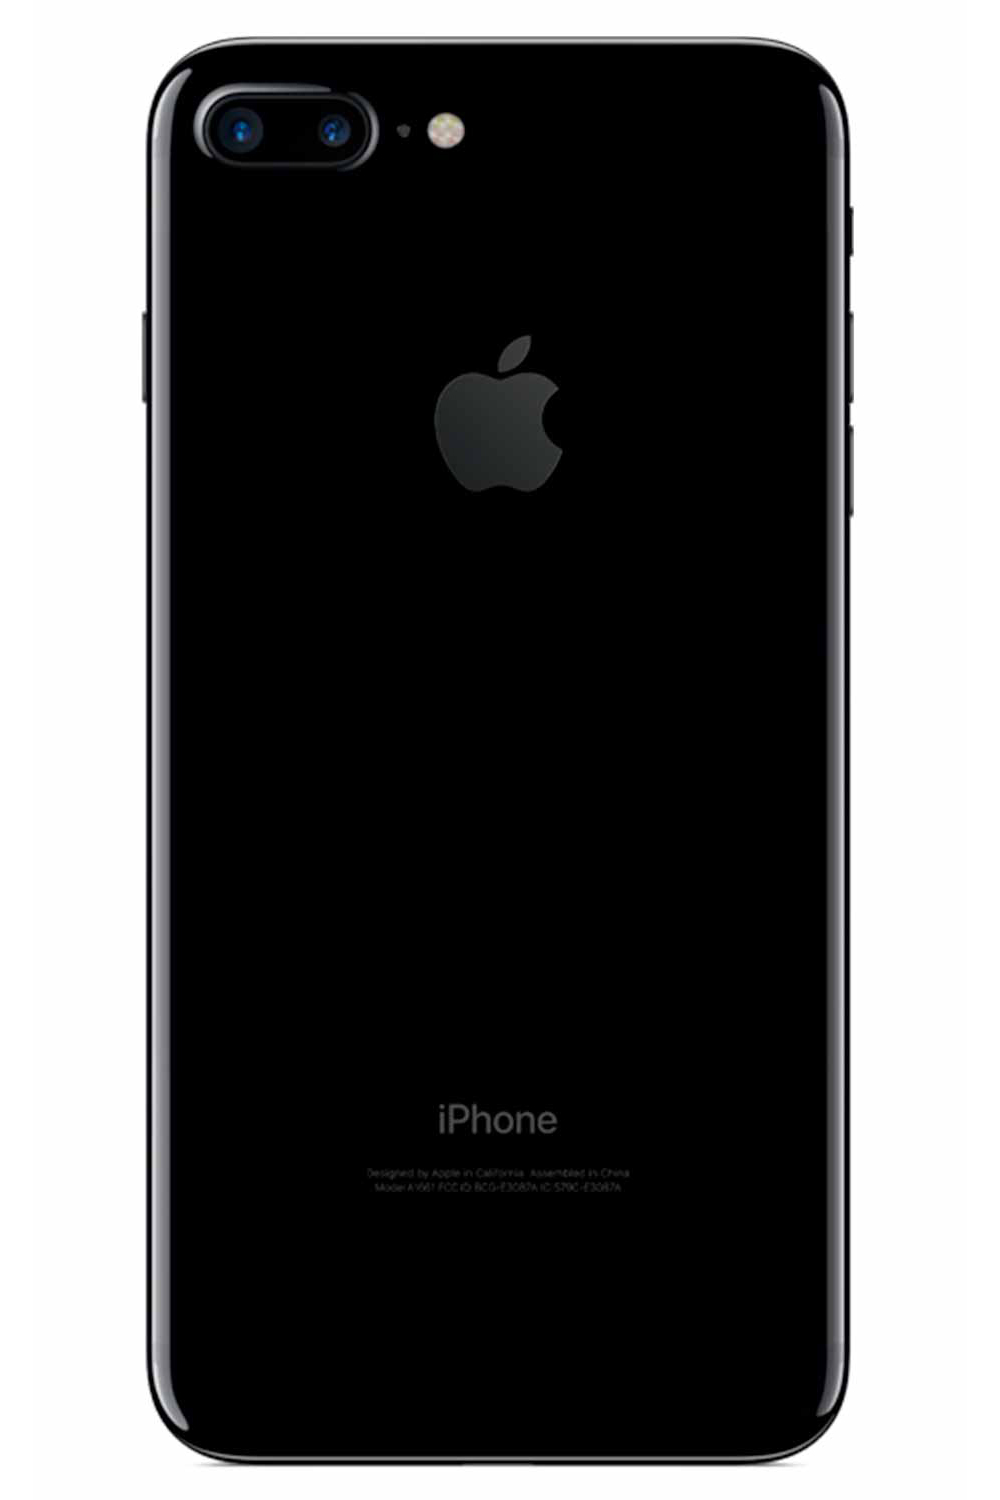 Apple iPhone7 Plus 128GB Pictures, Official Photos - WhatMobile